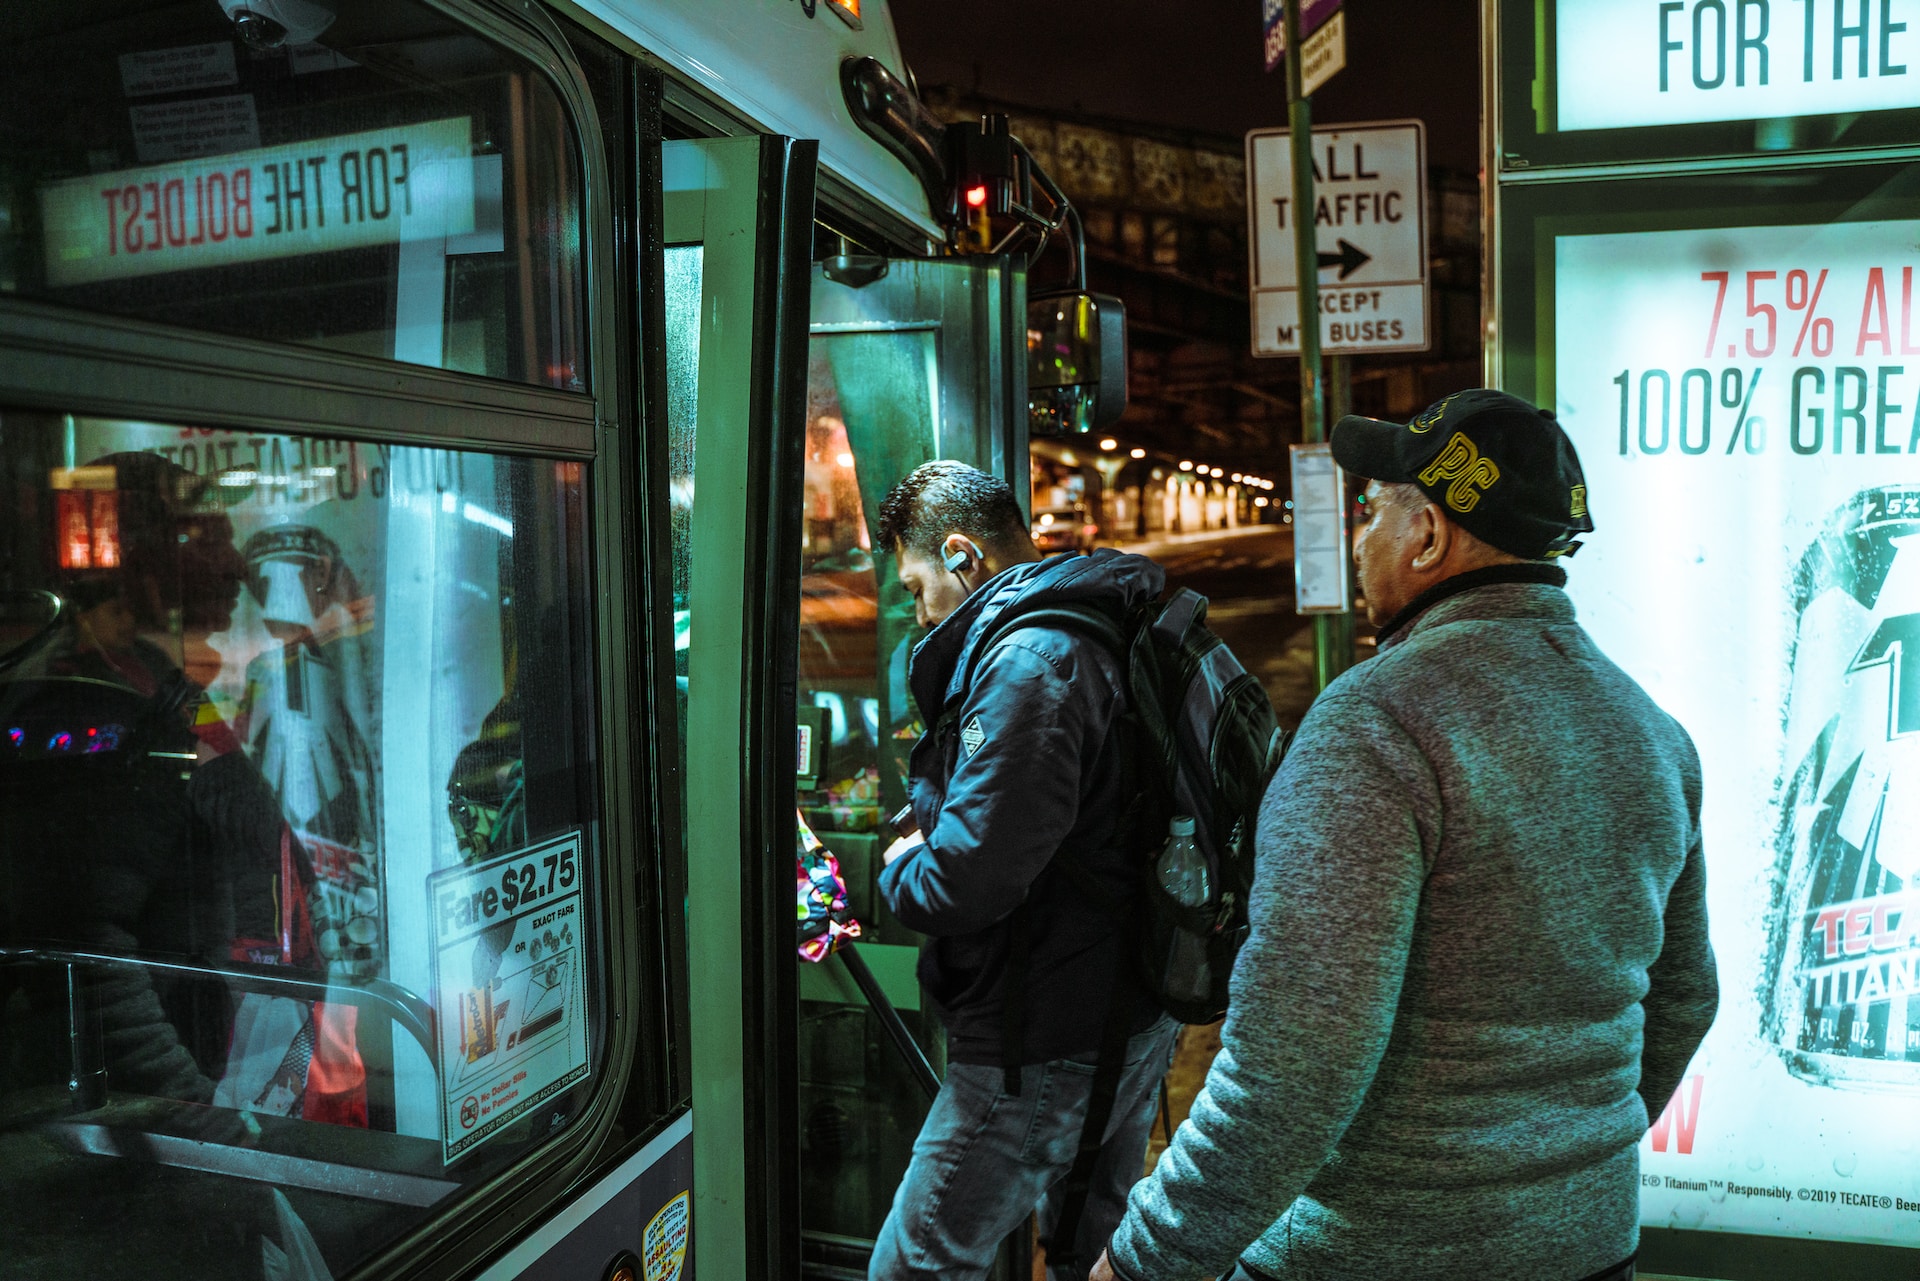 Two passengers board a night bus in Brooklyn, NY